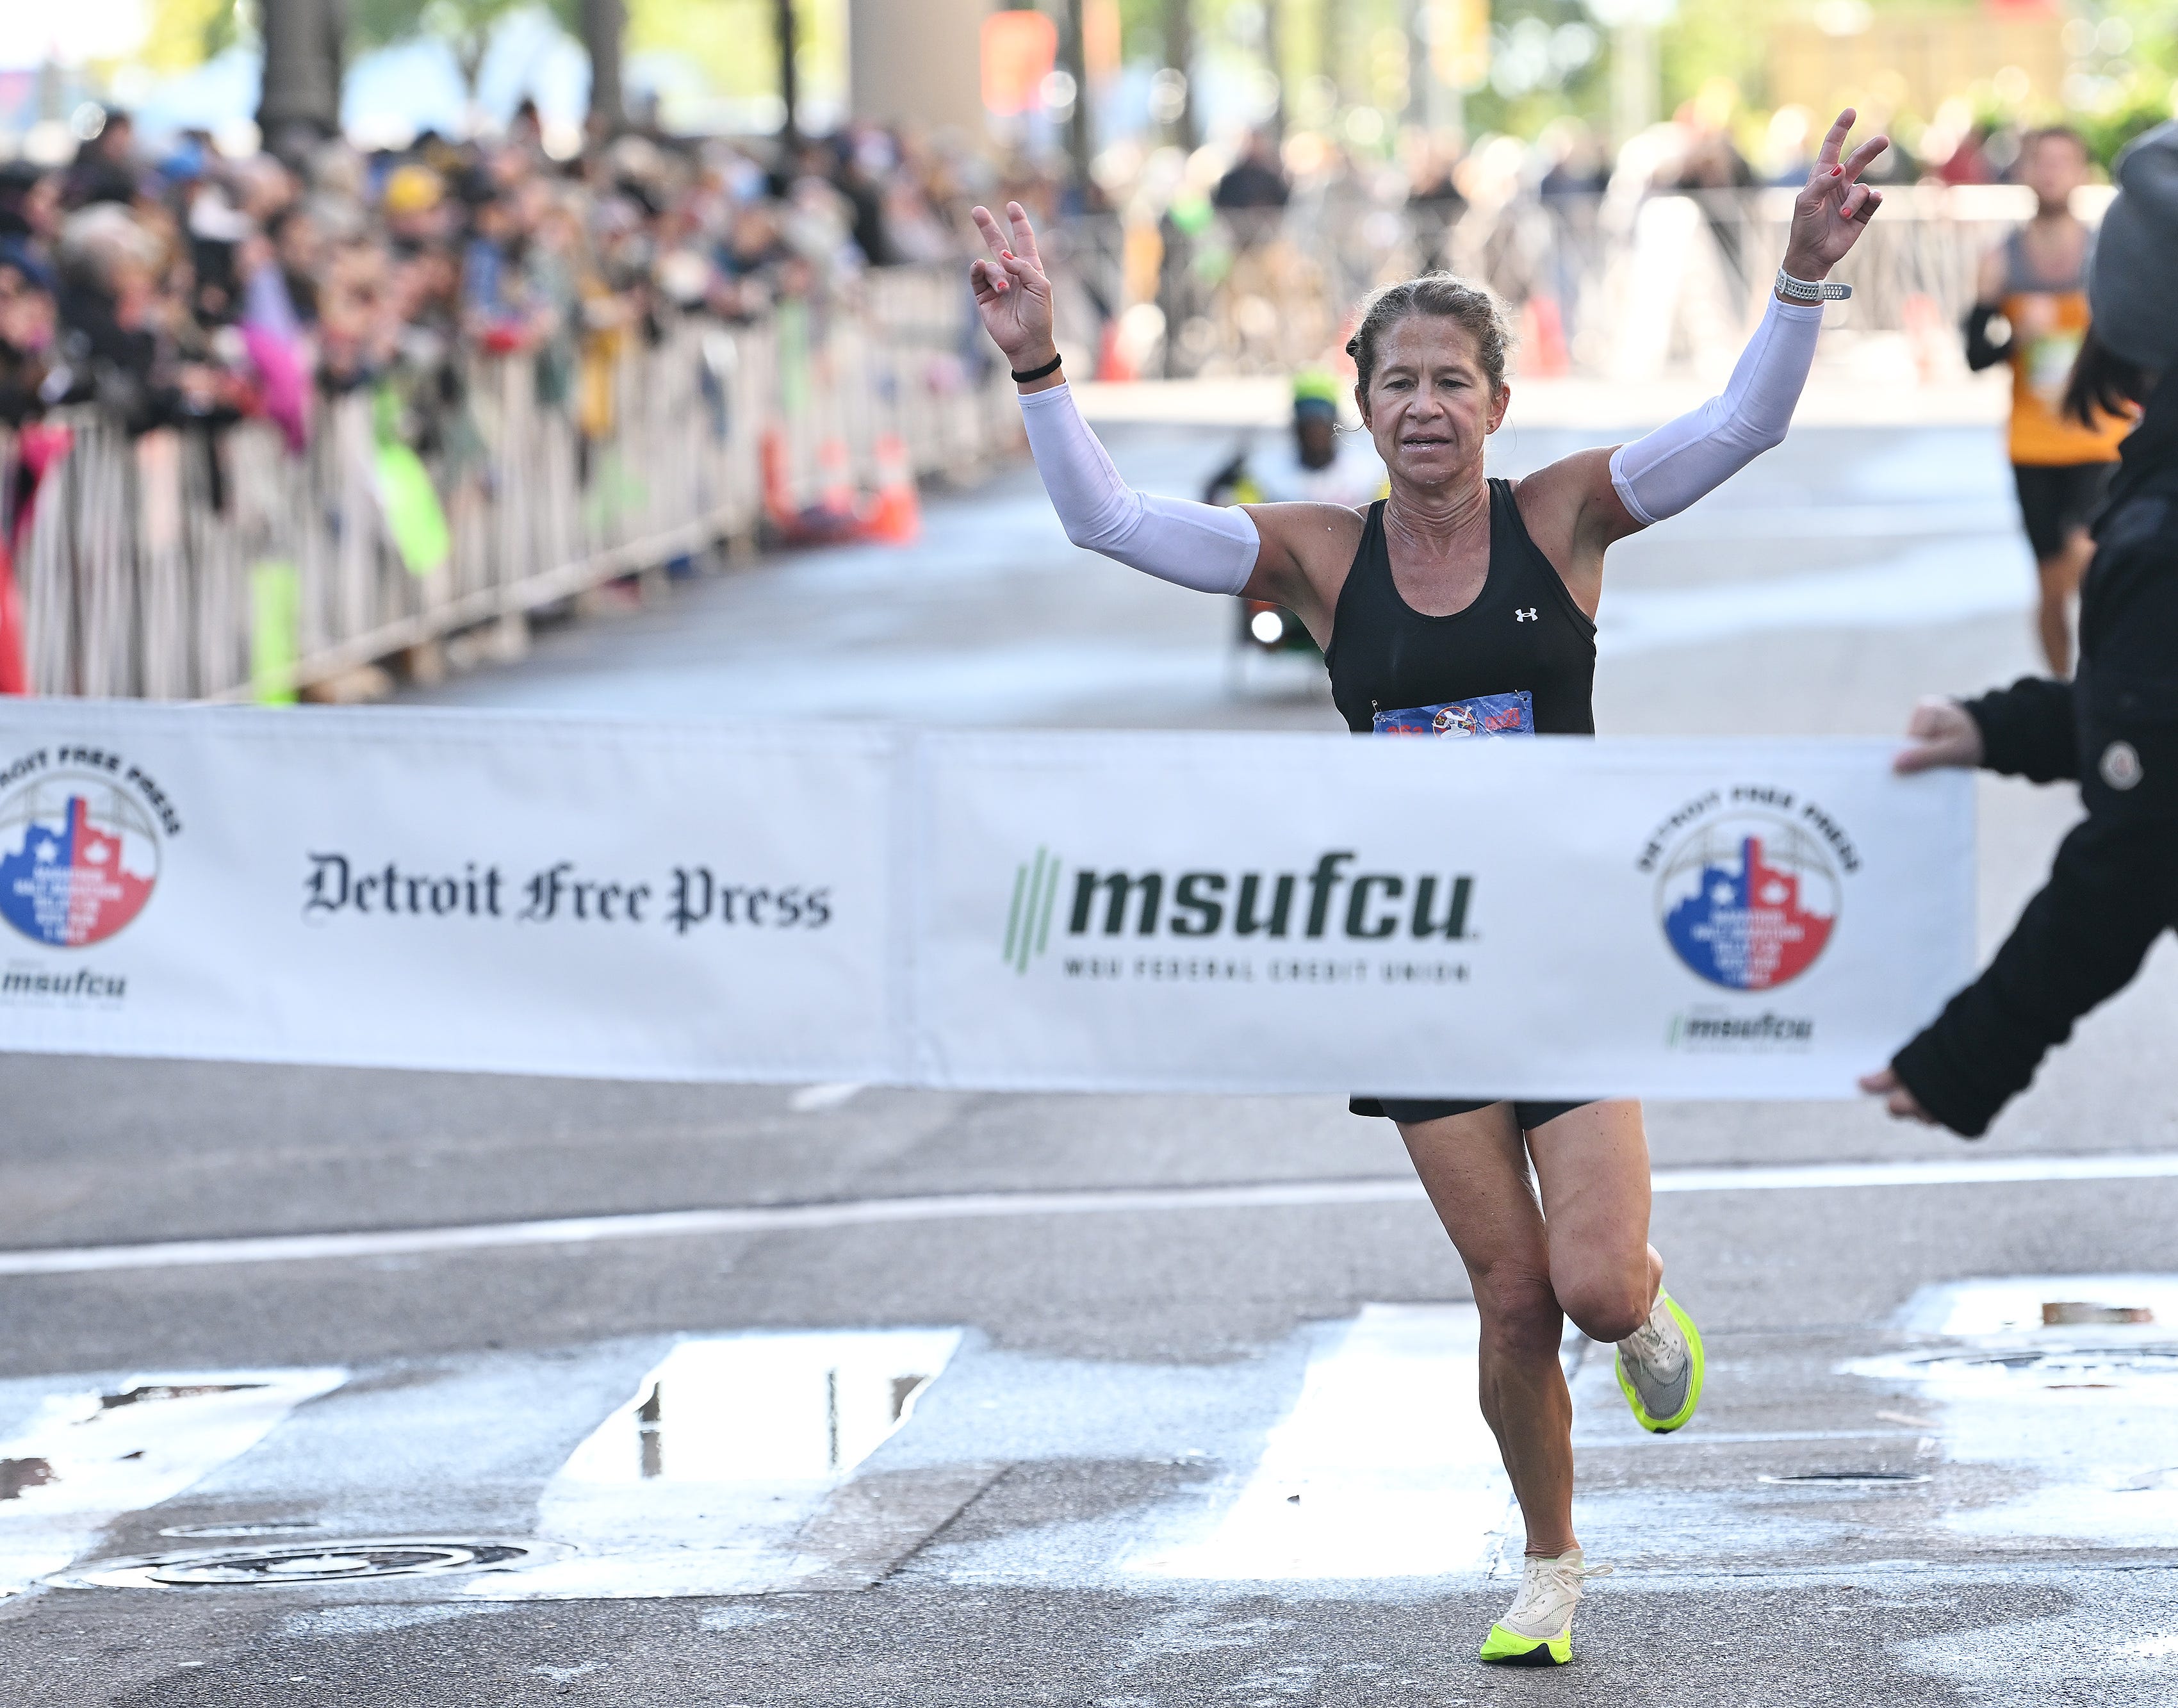 Kate Landau, 47, of Tacoma reacts as she is about to win the women’s division overall at the Detroit Free Press Marathon in Detroit on Oct. 15, 2023.